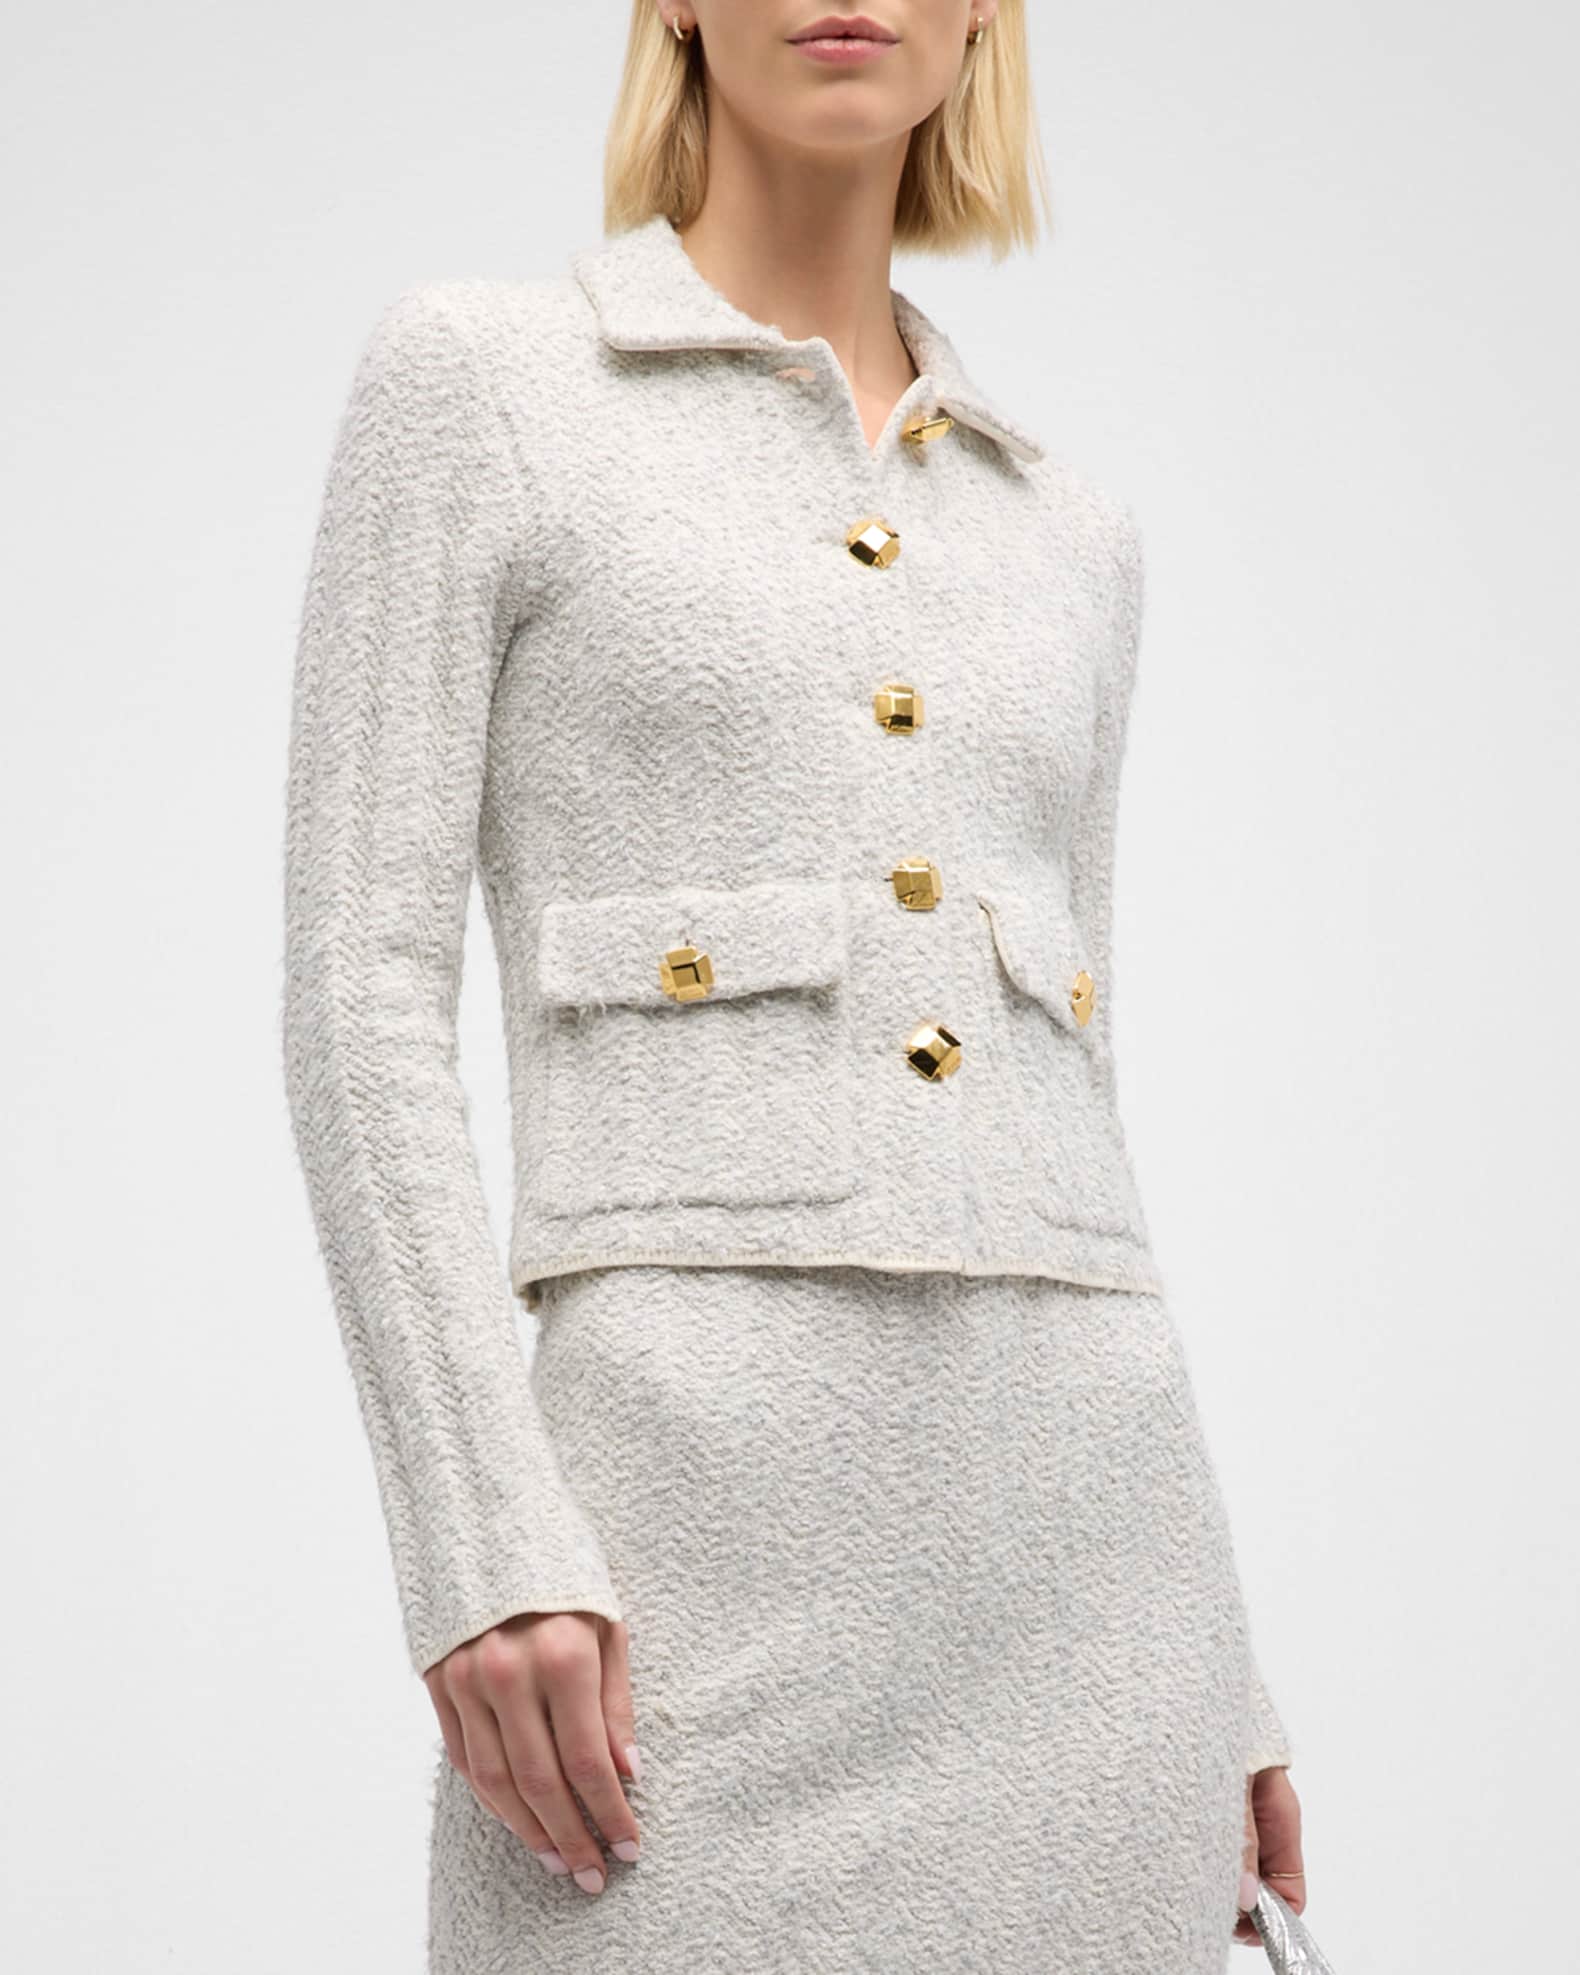 Chanel Yellow and Grey Fantasy Tweed Belted Blazer and Dress Set M Chanel |  The Luxury Closet